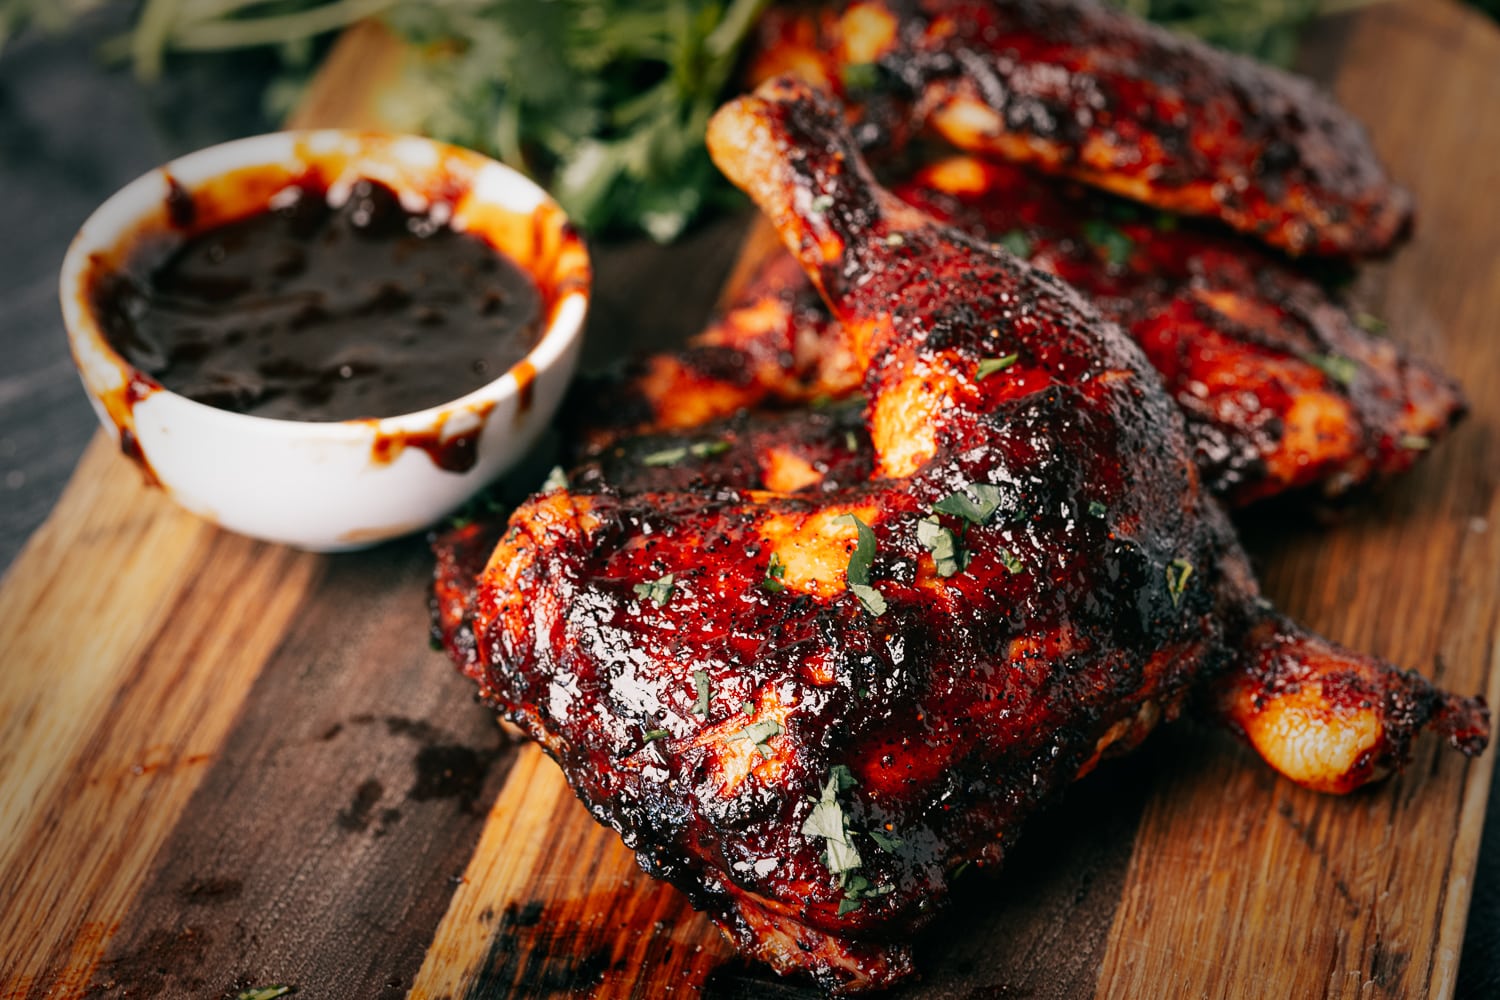 Chicken quarters on a wooden cutting board next to a small bowl of BBQ sauce.